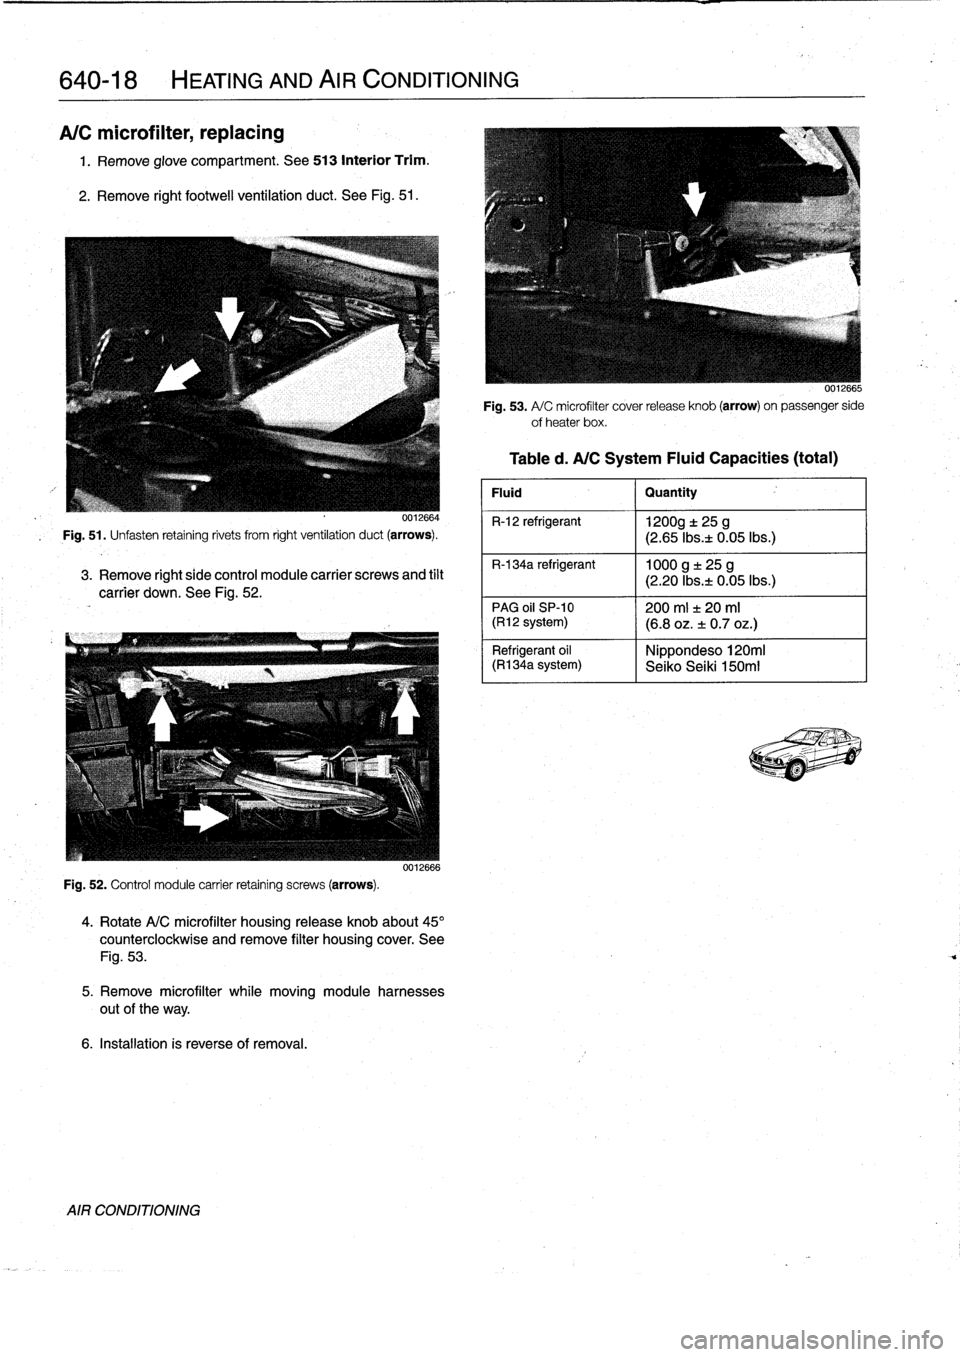 BMW 328i 1993 E36 Workshop Manual 
640-18

	

HEATING
AND
AIR
CONDITIONING

A/C
microfilter,
replacing

1
.
Remove
glove
compartment
.
See
513
Interior
Trim
.

2
.
Remove
right
footwell
ventilation
duct
.
See
Fig
.
51
.

0012664

Fig
